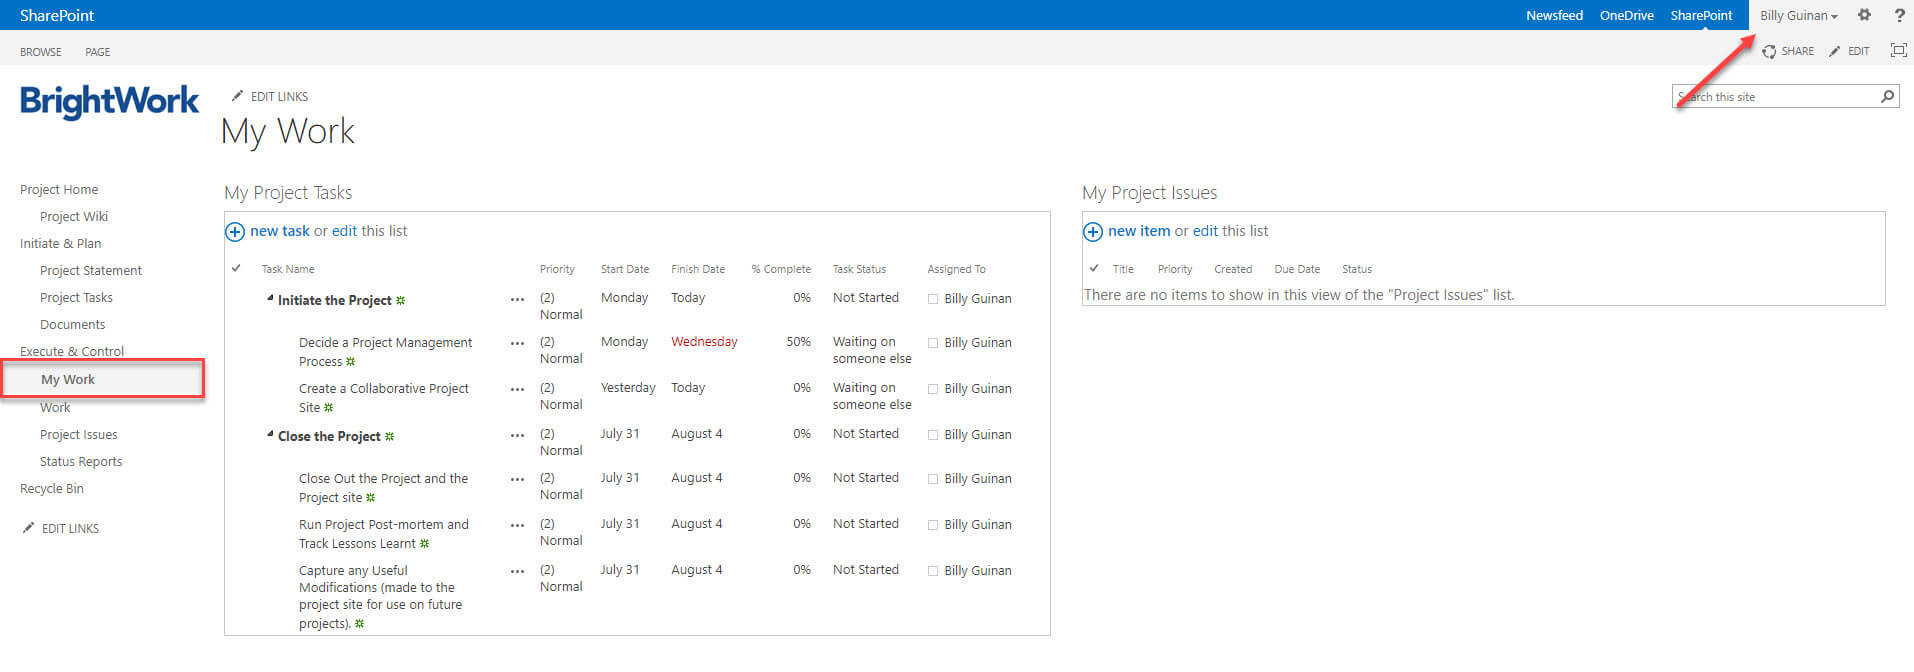 SharePoint site out of the box